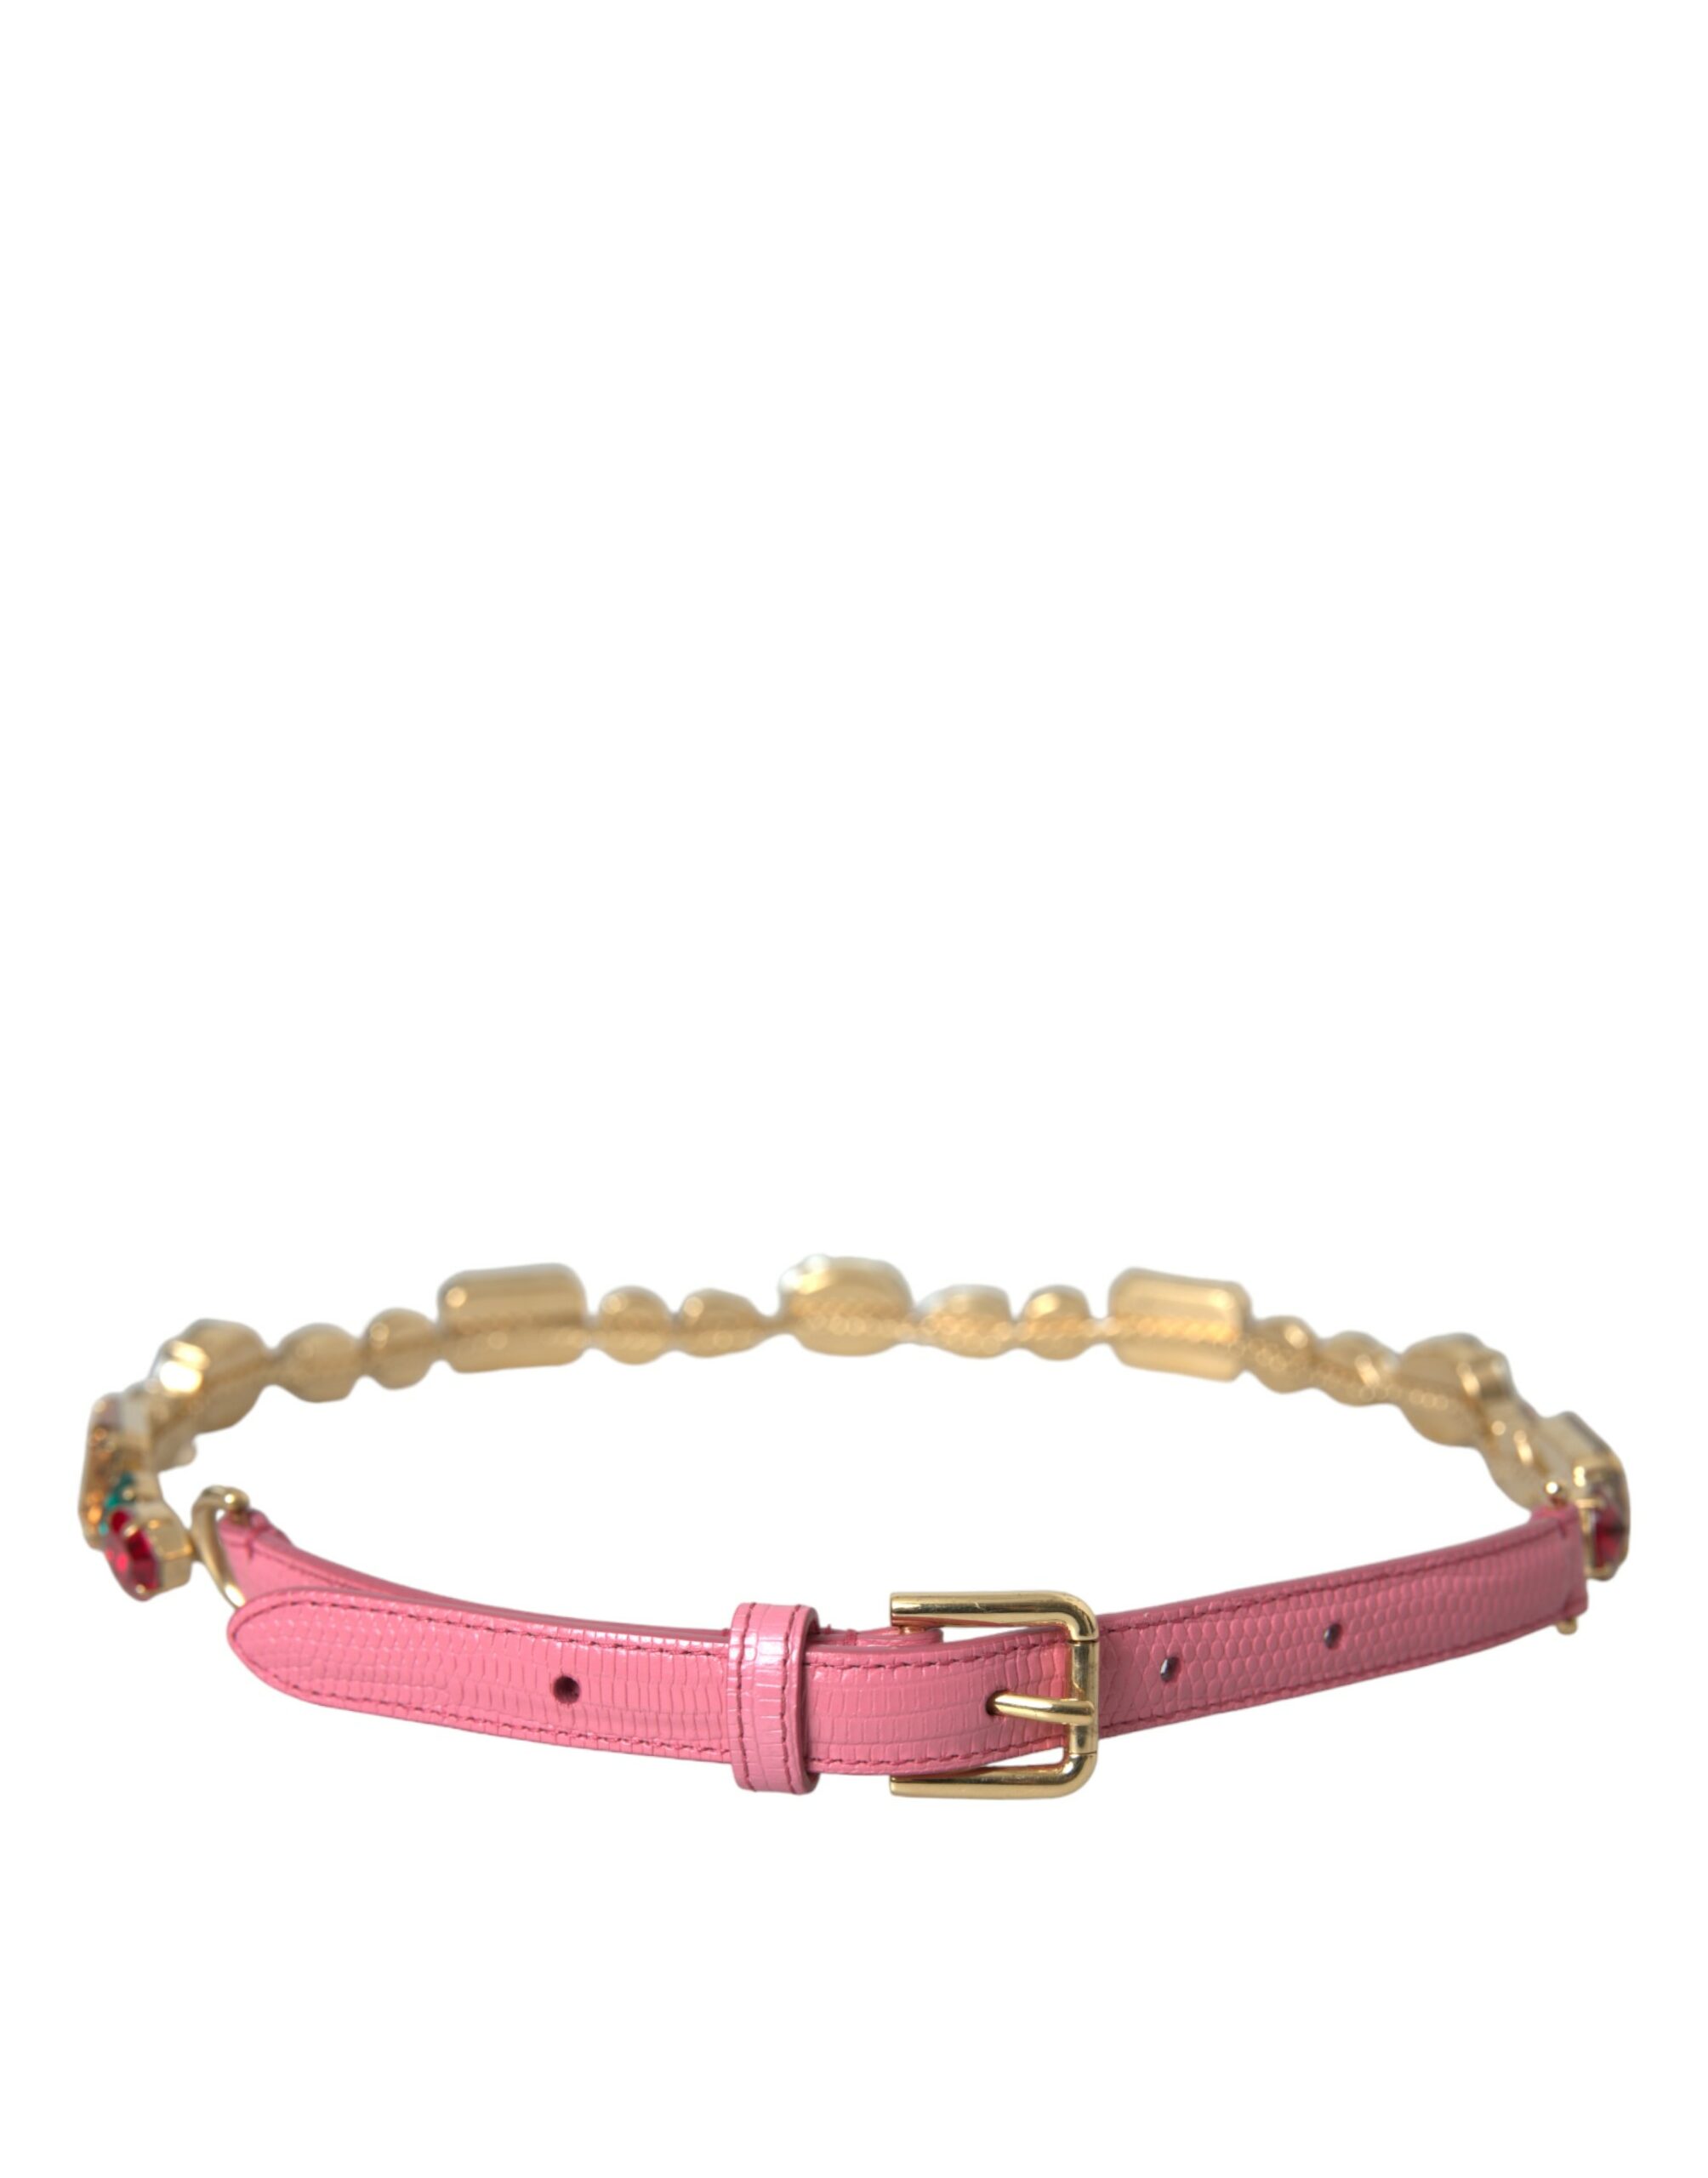 Dolce Gabbana Pink Leather Crystal Chain Embellished Belt 70 cm 28 Inches